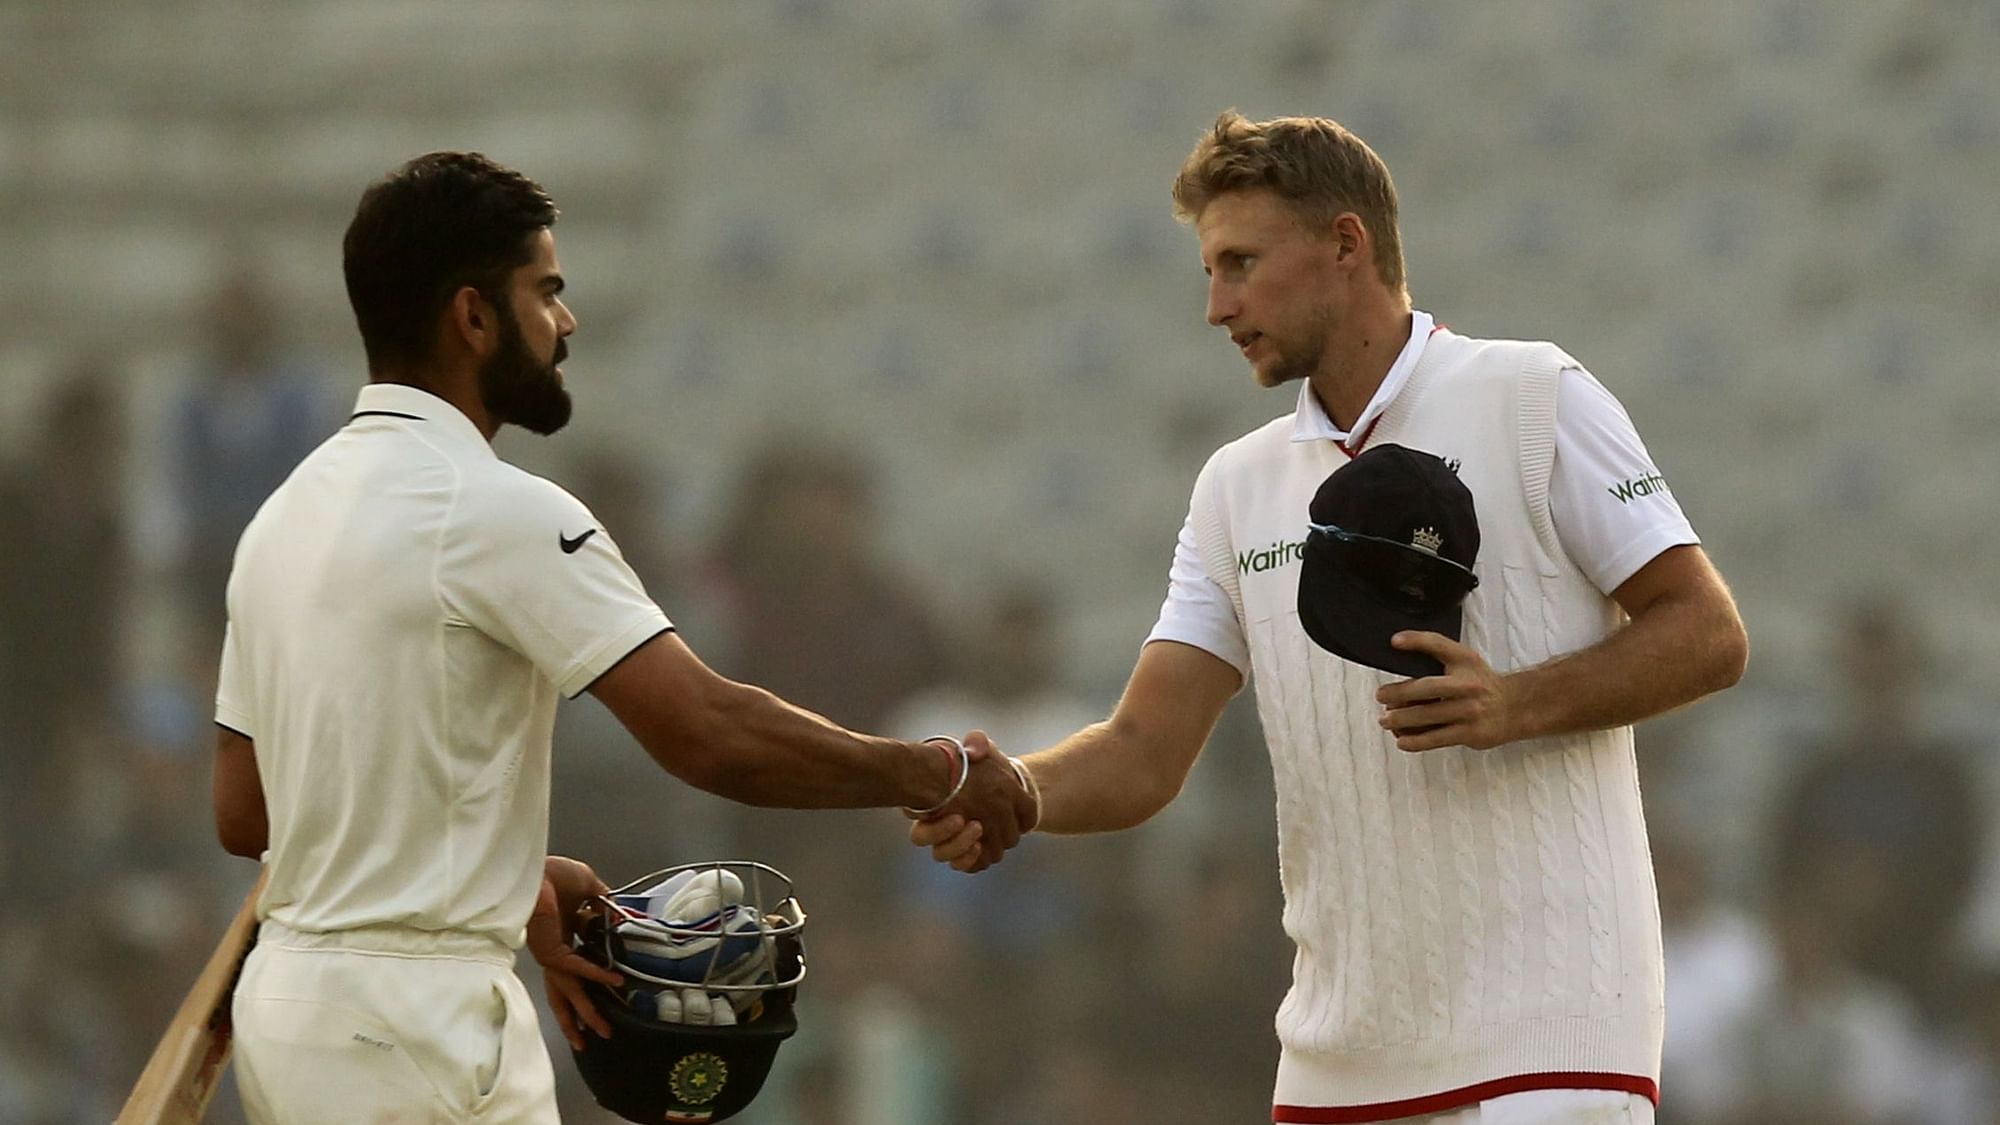 Virat Kohli and Joe Root will lead their teams in the upcoming Test series in India starting 5 February.